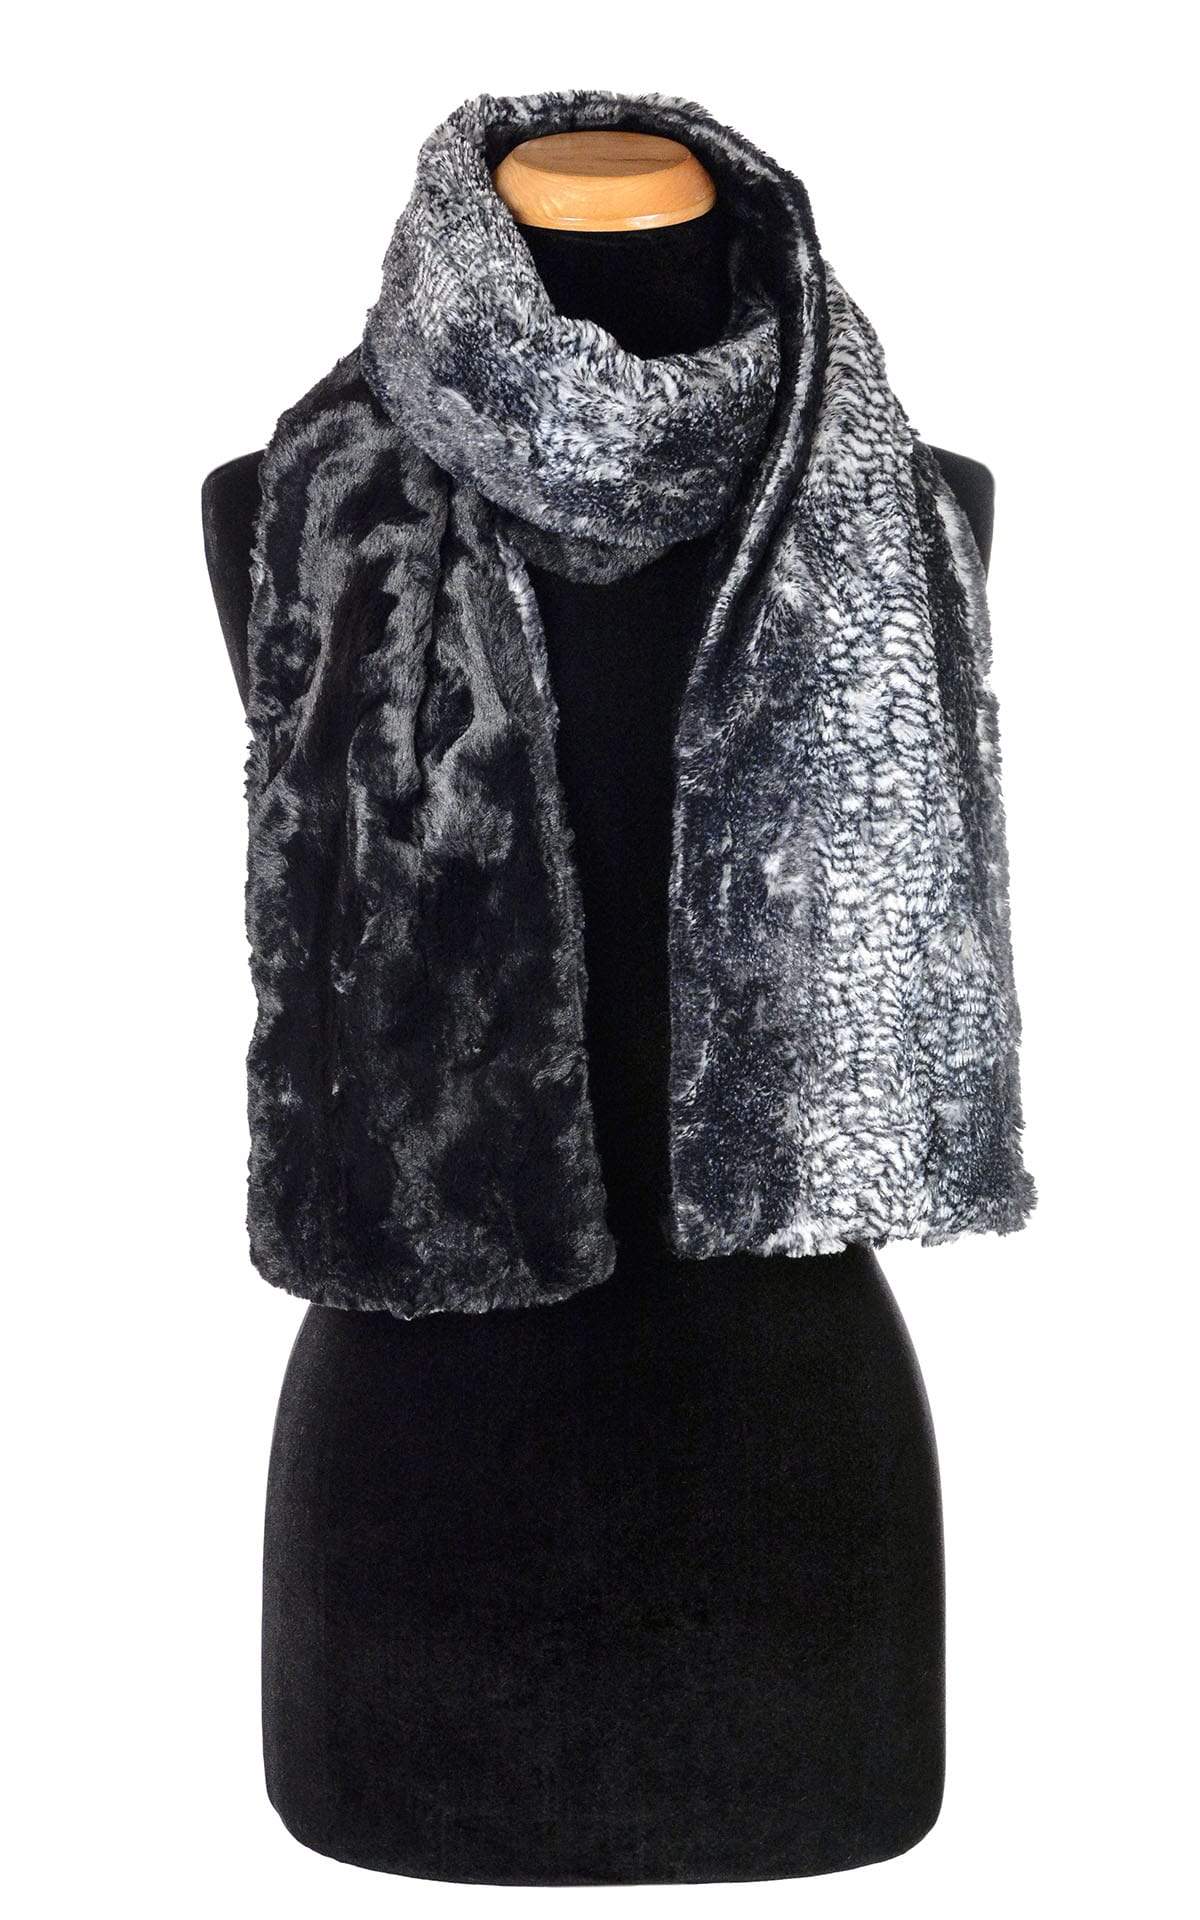 Women’s Product shot on mannequin of two-tone Classic Scarf Black Mamba animal snake print  with Cuddly Black Faux Fur | Handmade by Pandemonium Millinery Seattle, WA USA